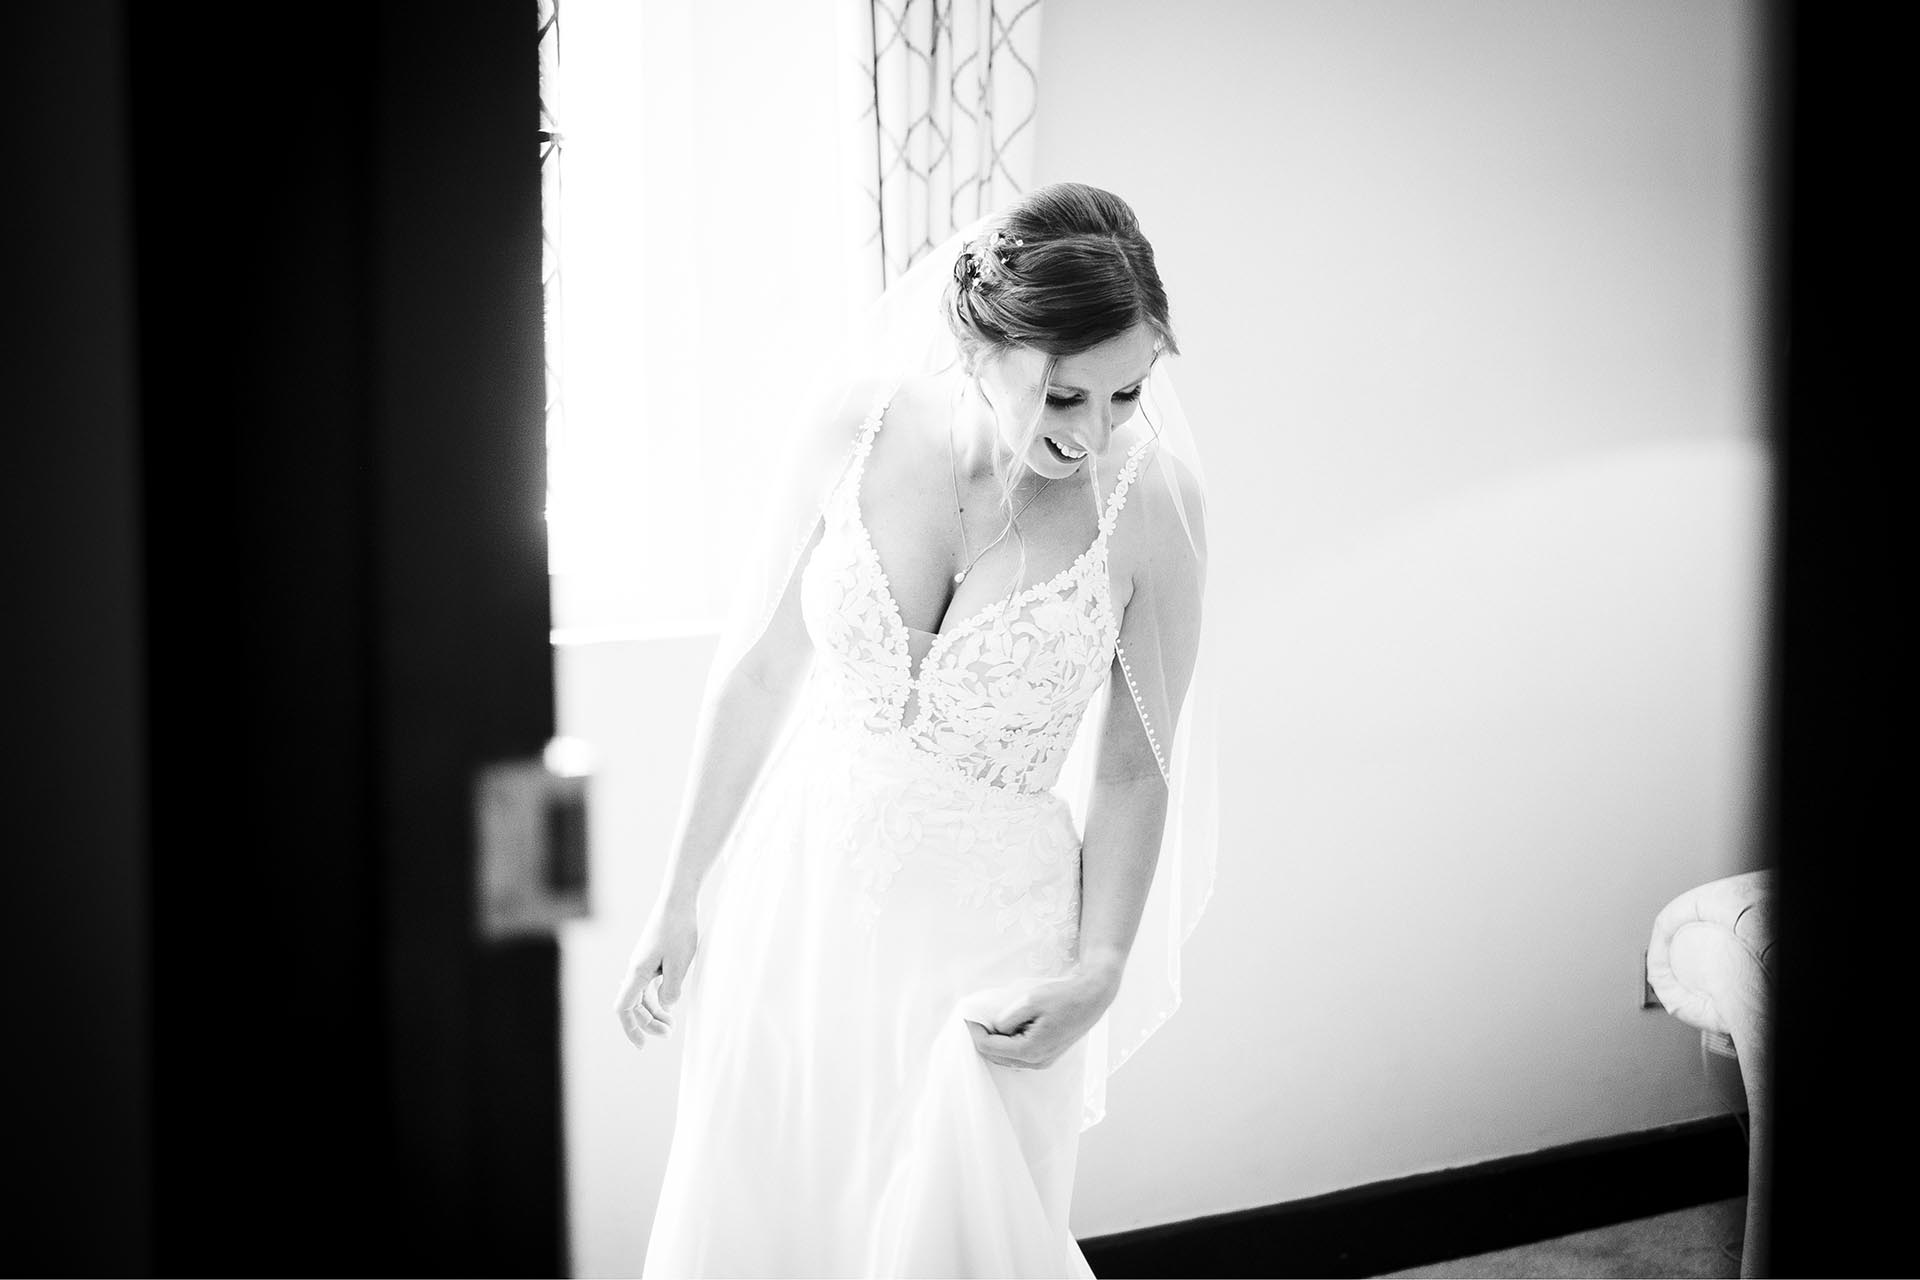 Bridal preparation photograph by Essex wedding photographer at Leez Priory Great Leighs Chelmsford